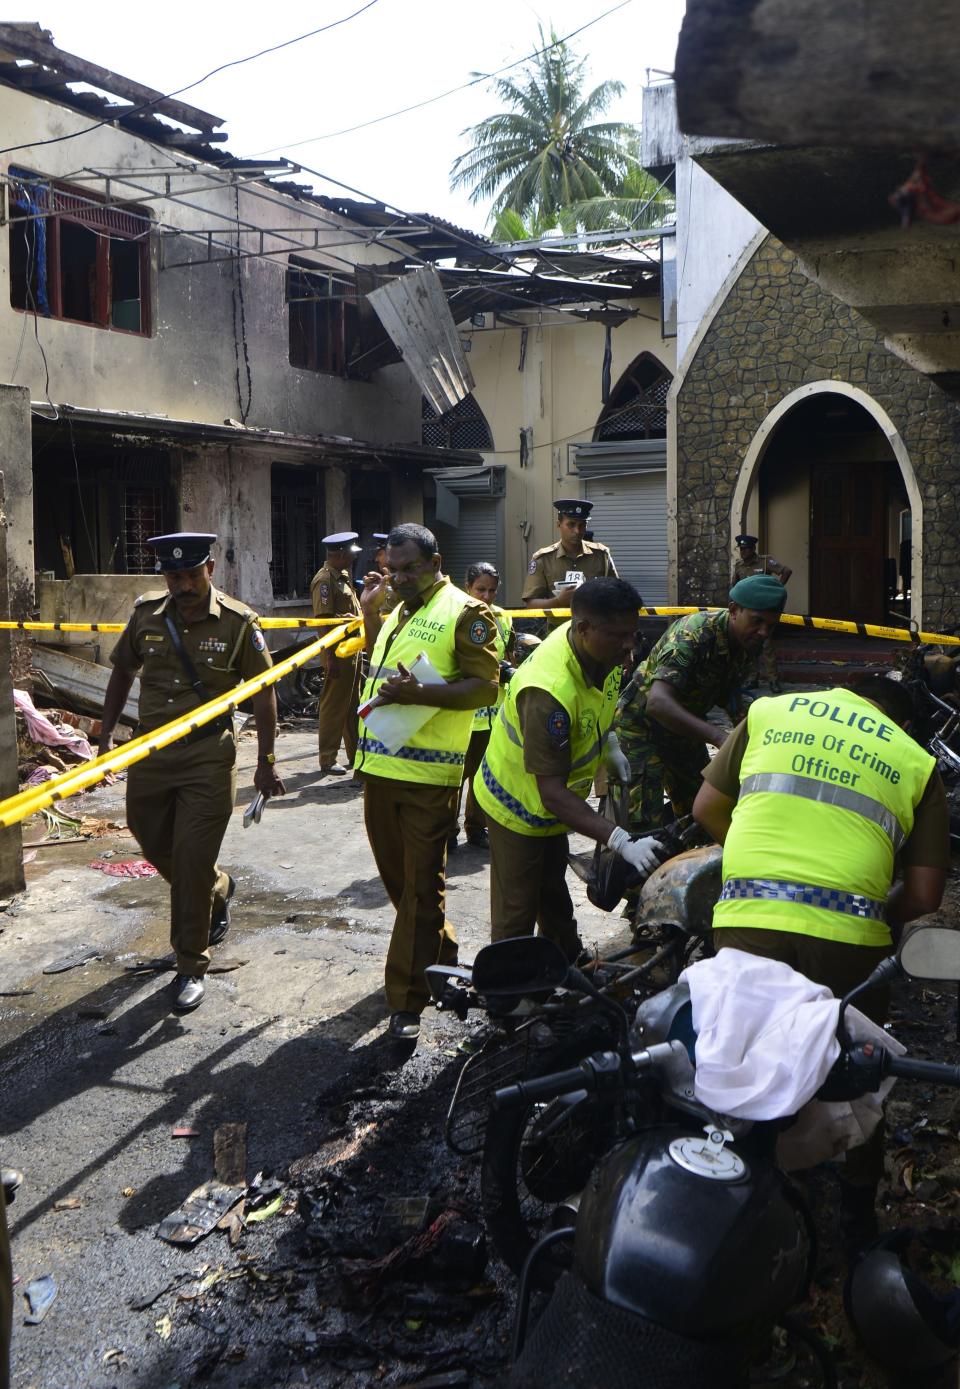 The bombing attacks in Sri Lanka killed at least 290 people, including Americans. Who is responsible? National Thowfeek Jamaath, a militant group.